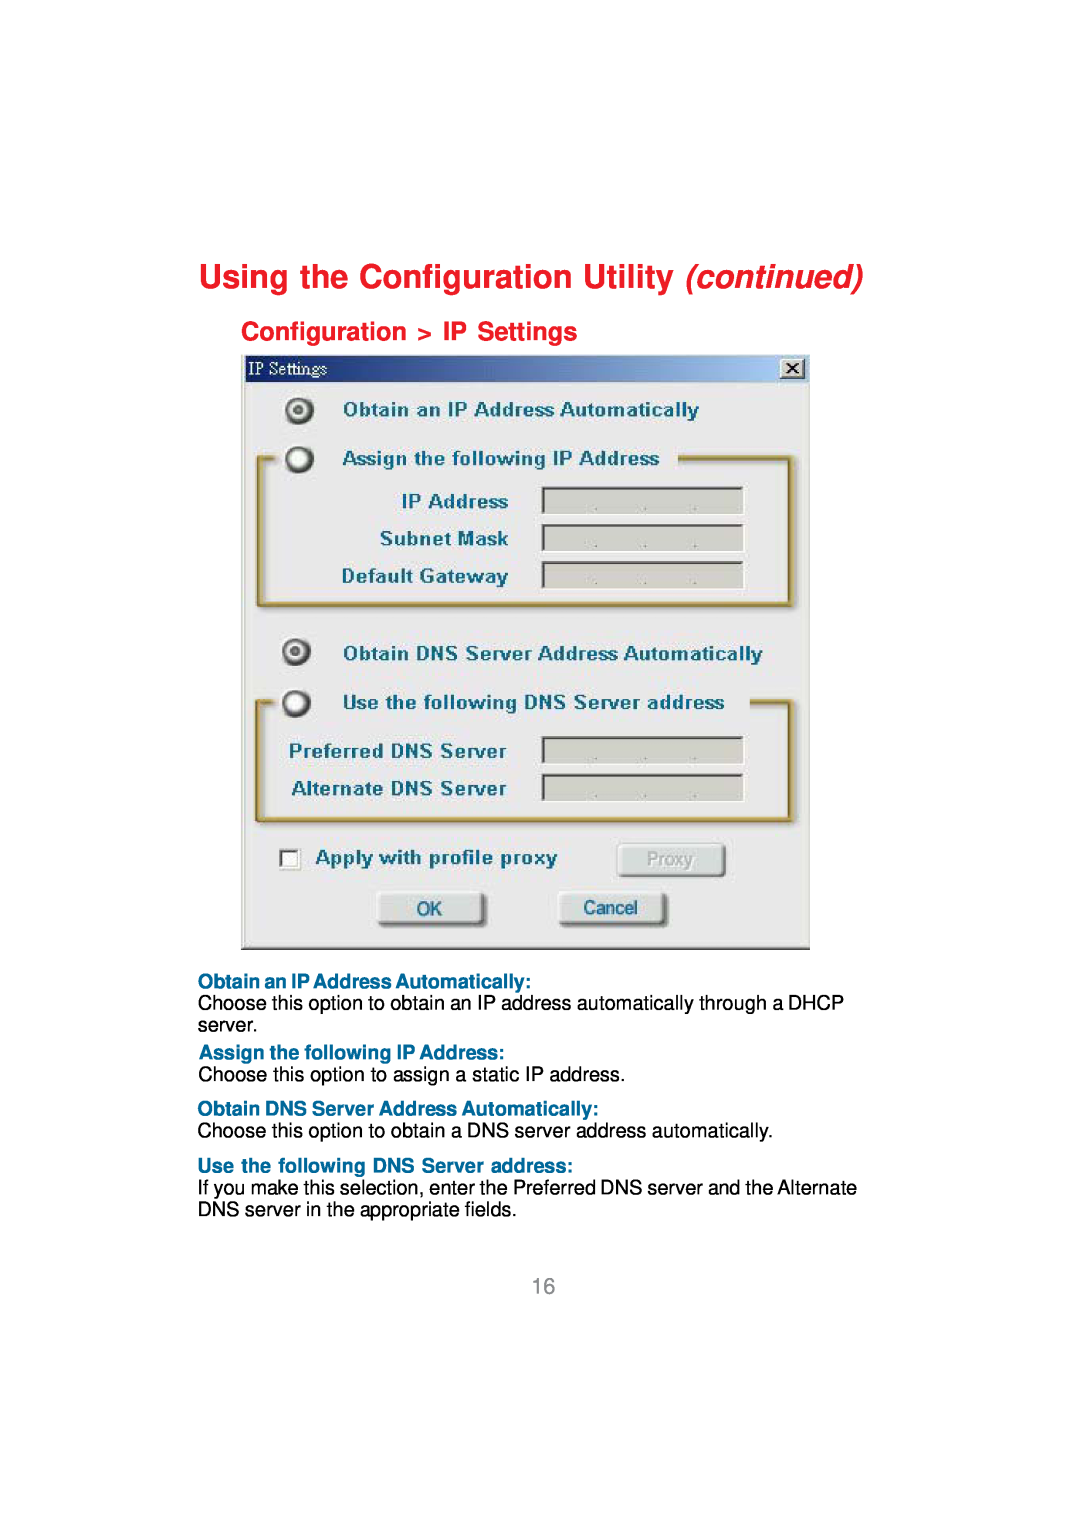 D-Link DWL-AG530 Configuration IP Settings, Using the Configuration Utility continued, Obtain an IP Address Automatically 